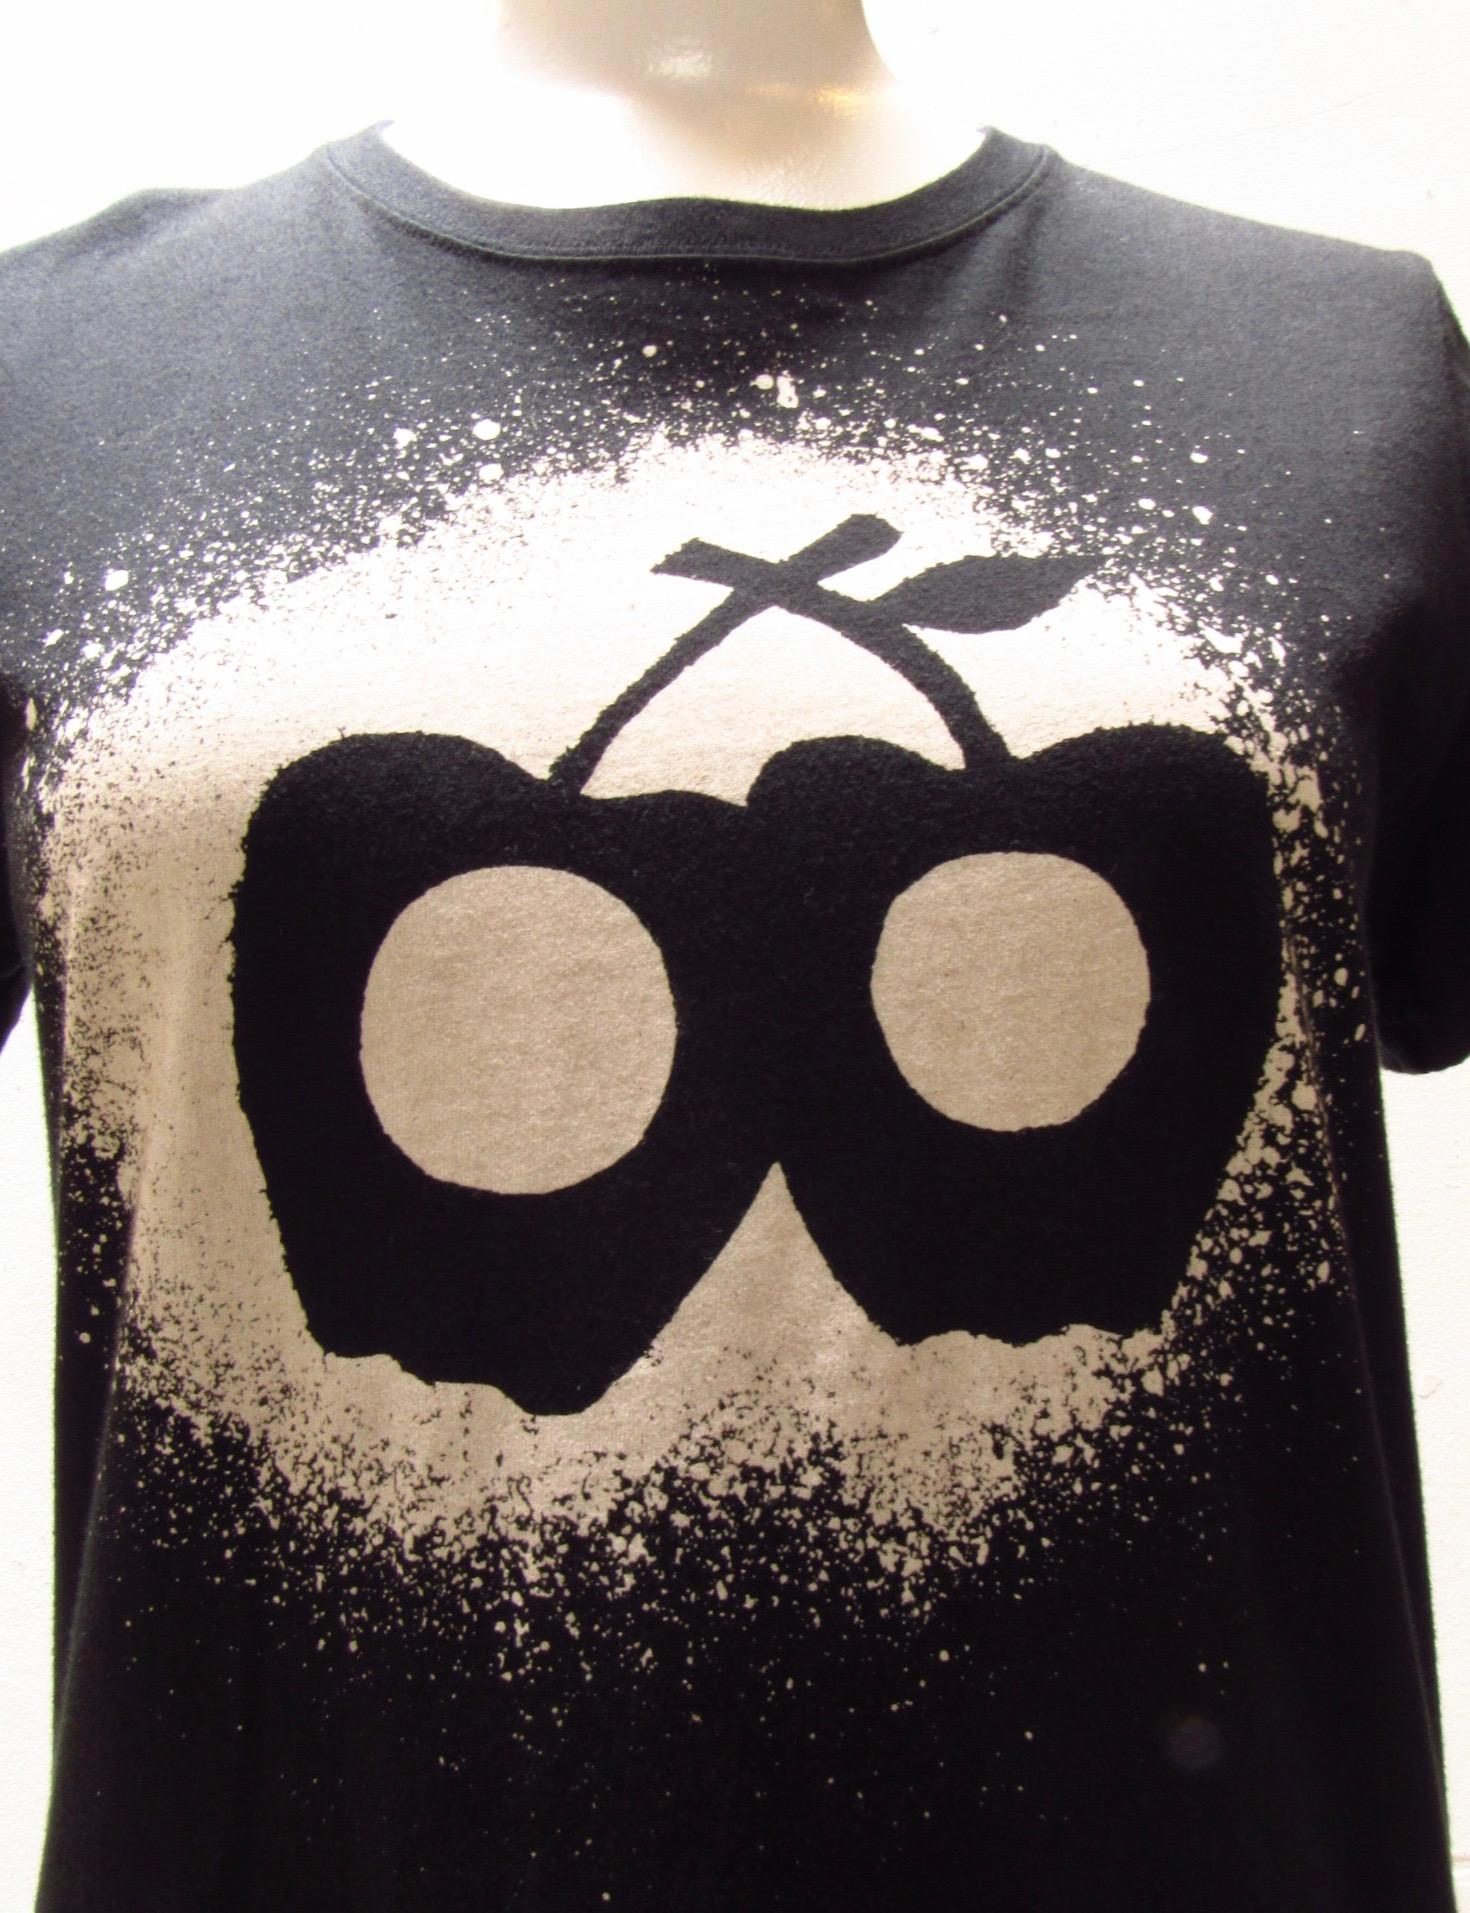 Undercover Apple Eyes Tee In New Condition For Sale In Laguna Beach, CA